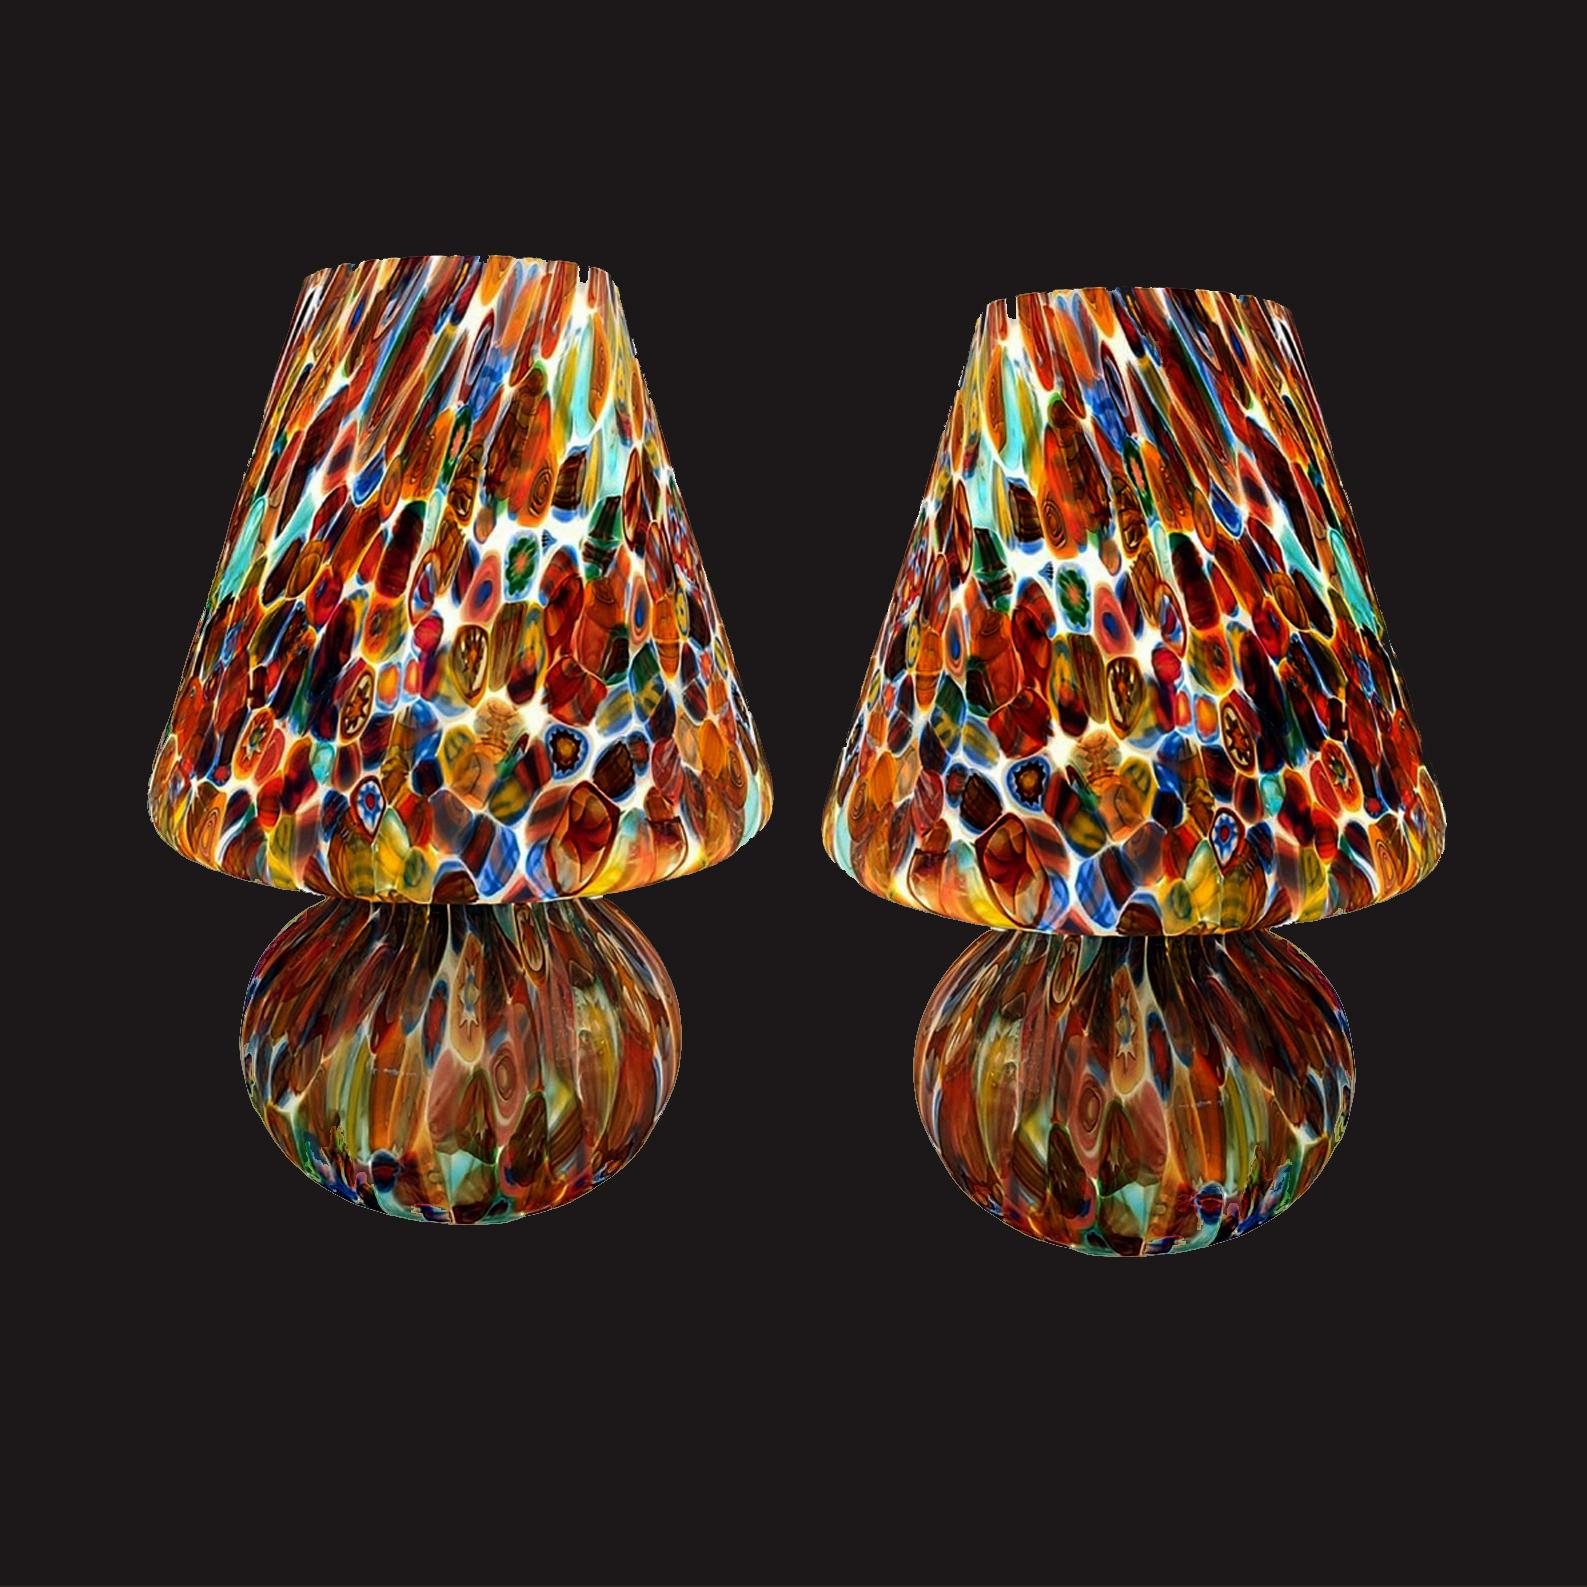 Table lamps made entirely with murrine millefiori murano glass.
Handcrafted by Murano glass master artisan. Custom made by hand and each piece differs from the other. Limited edition.
The murrina technique involves slicing canes of glass to expose